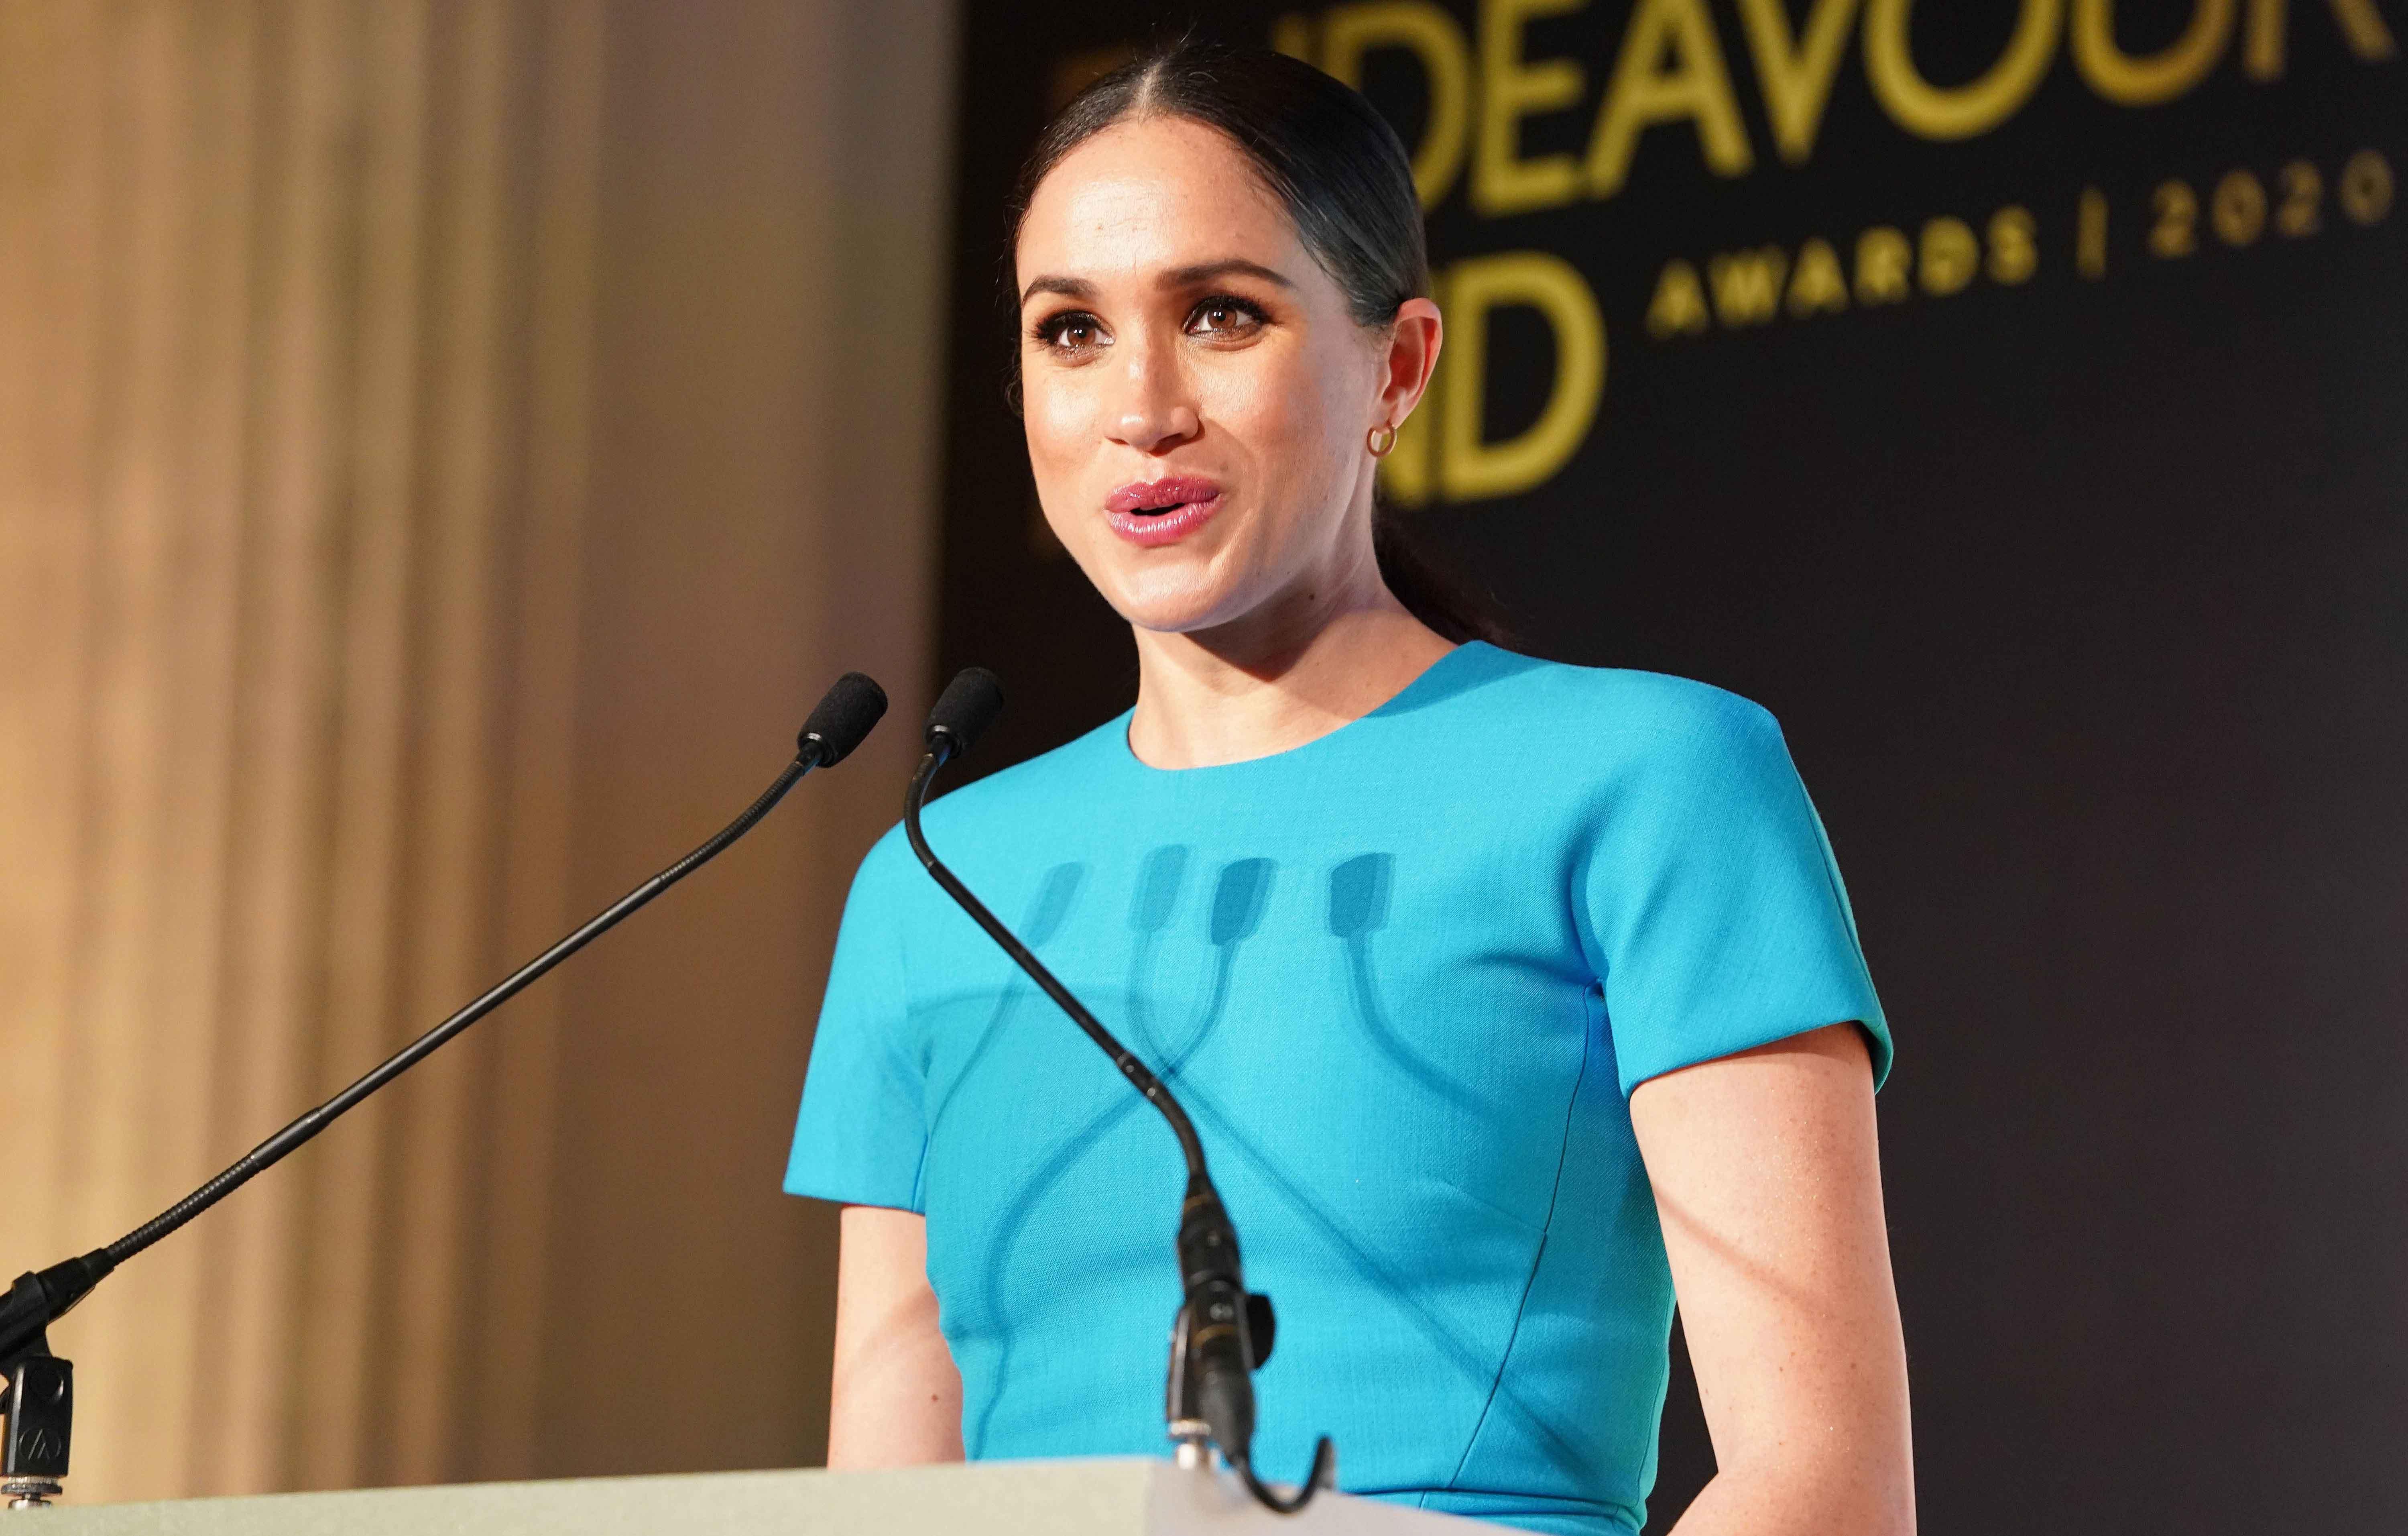 Meghan Markle 'Conditioned' To Keep Her 'Composure' Amid Backlash